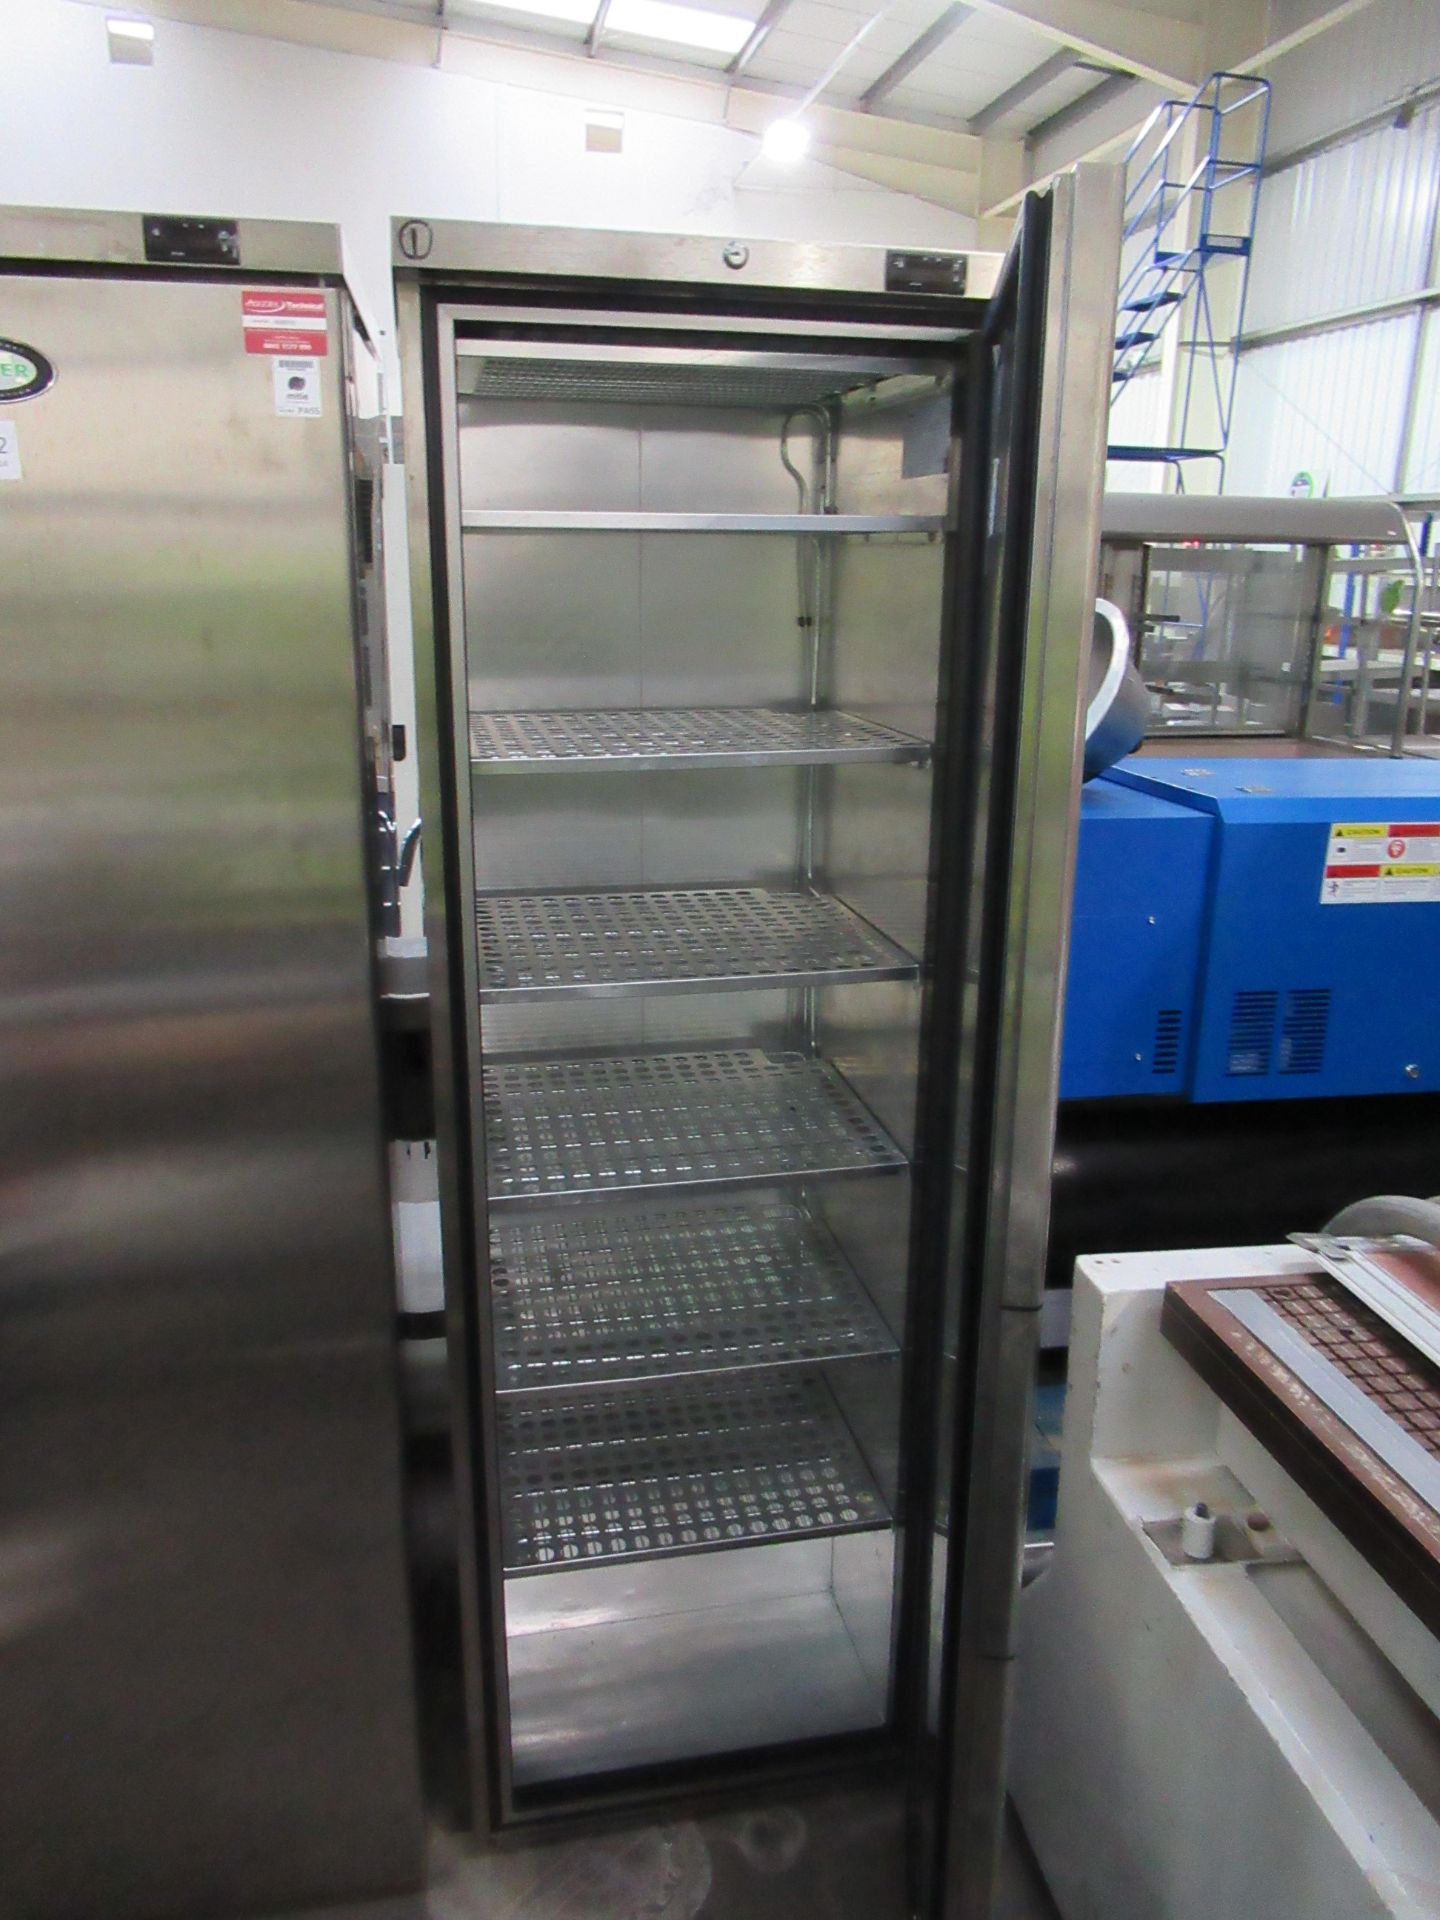 Foster Stainless Steel Single Door Commercial LR410 Mobile Freezer - Image 2 of 2